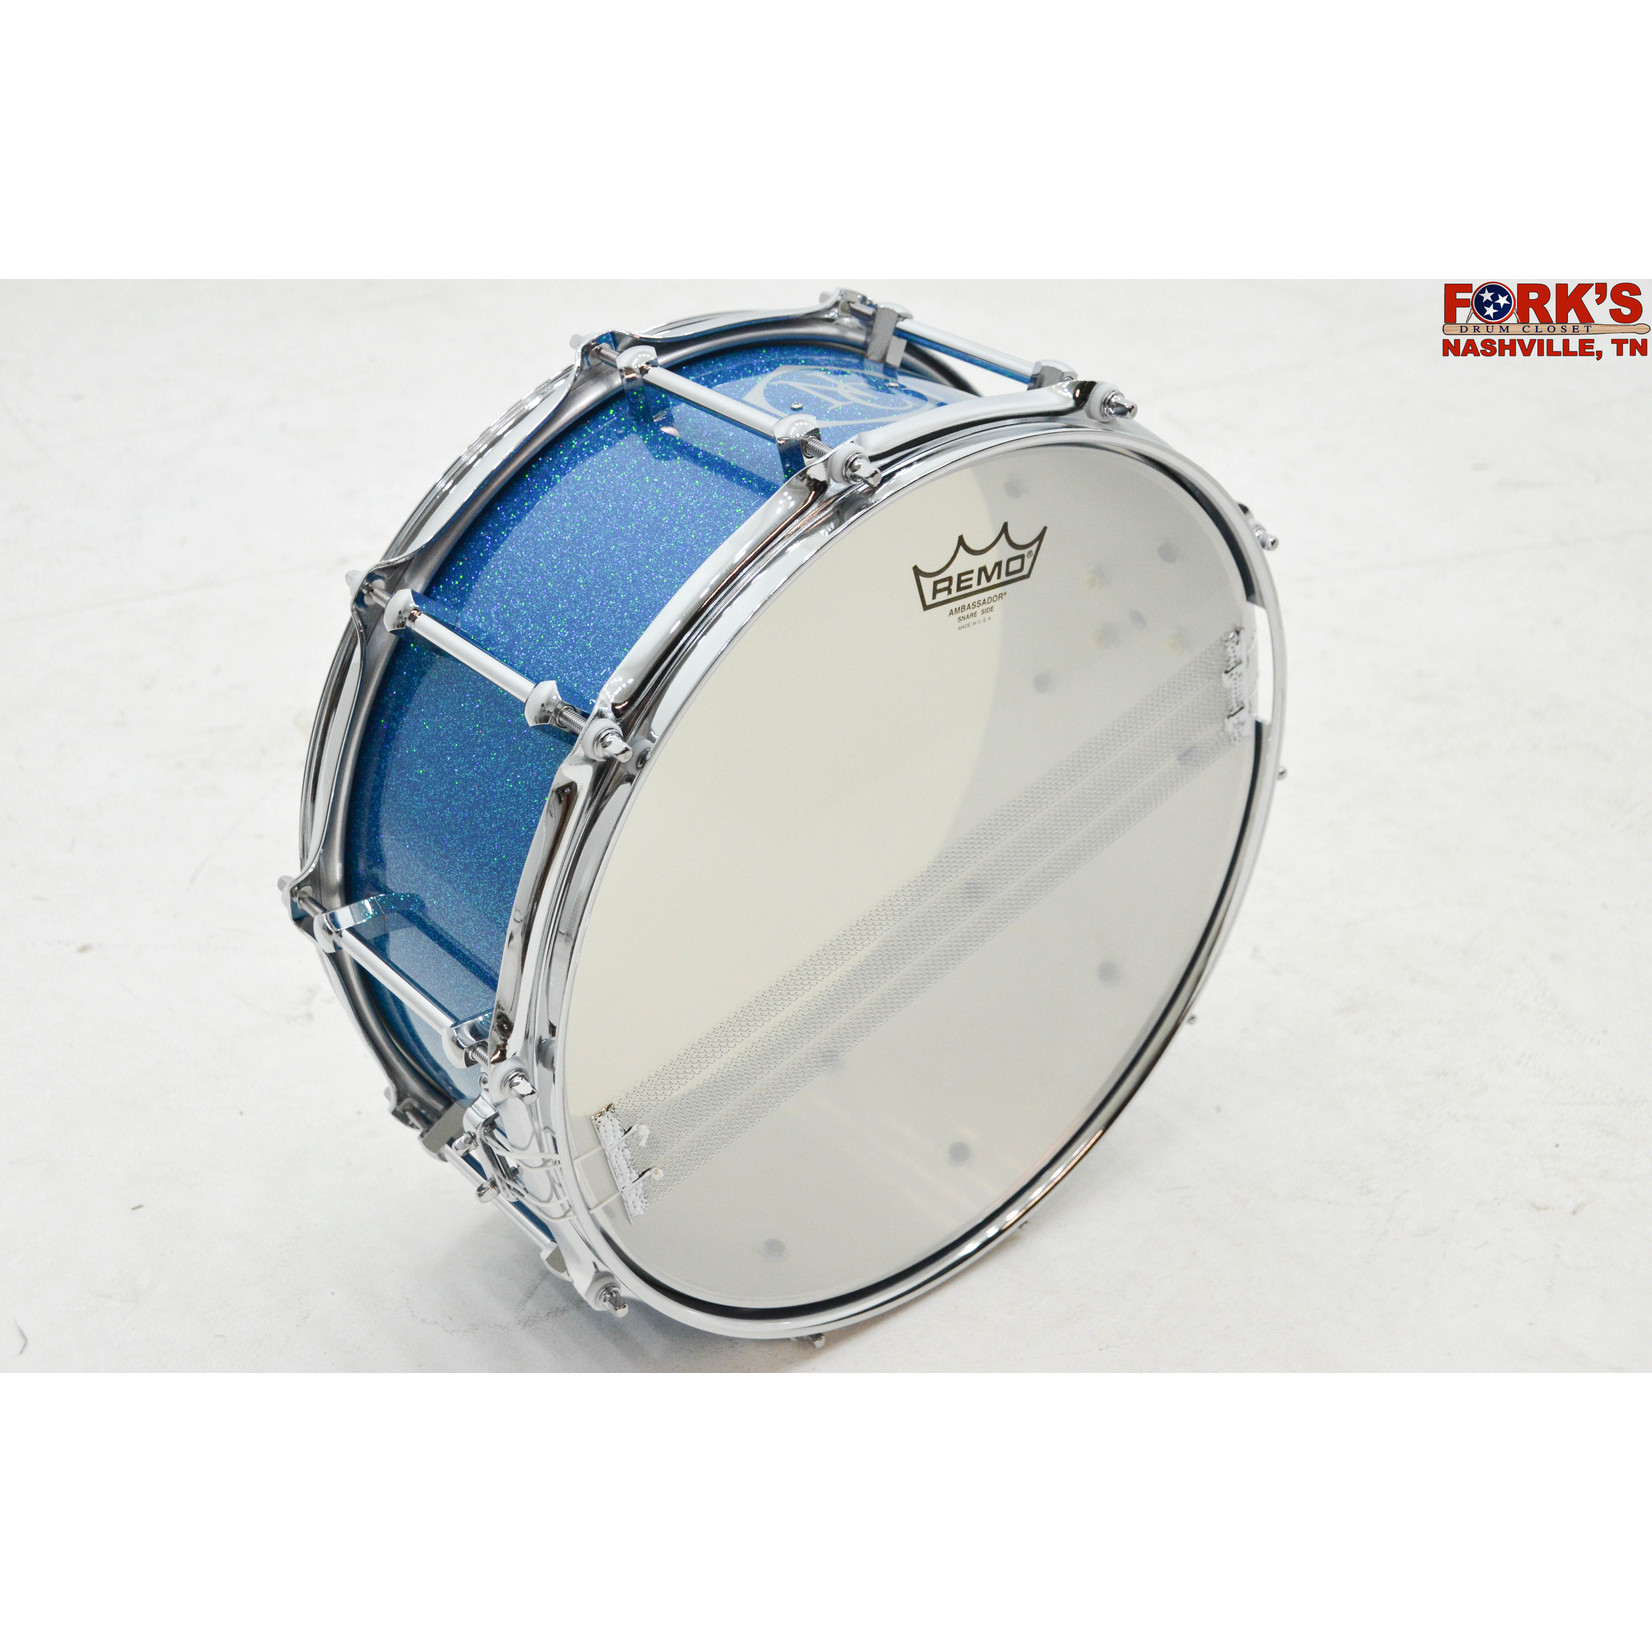 Noble and Cooley Noble and Cooley Alloy Classic 6x14 - "Cairo Blue"